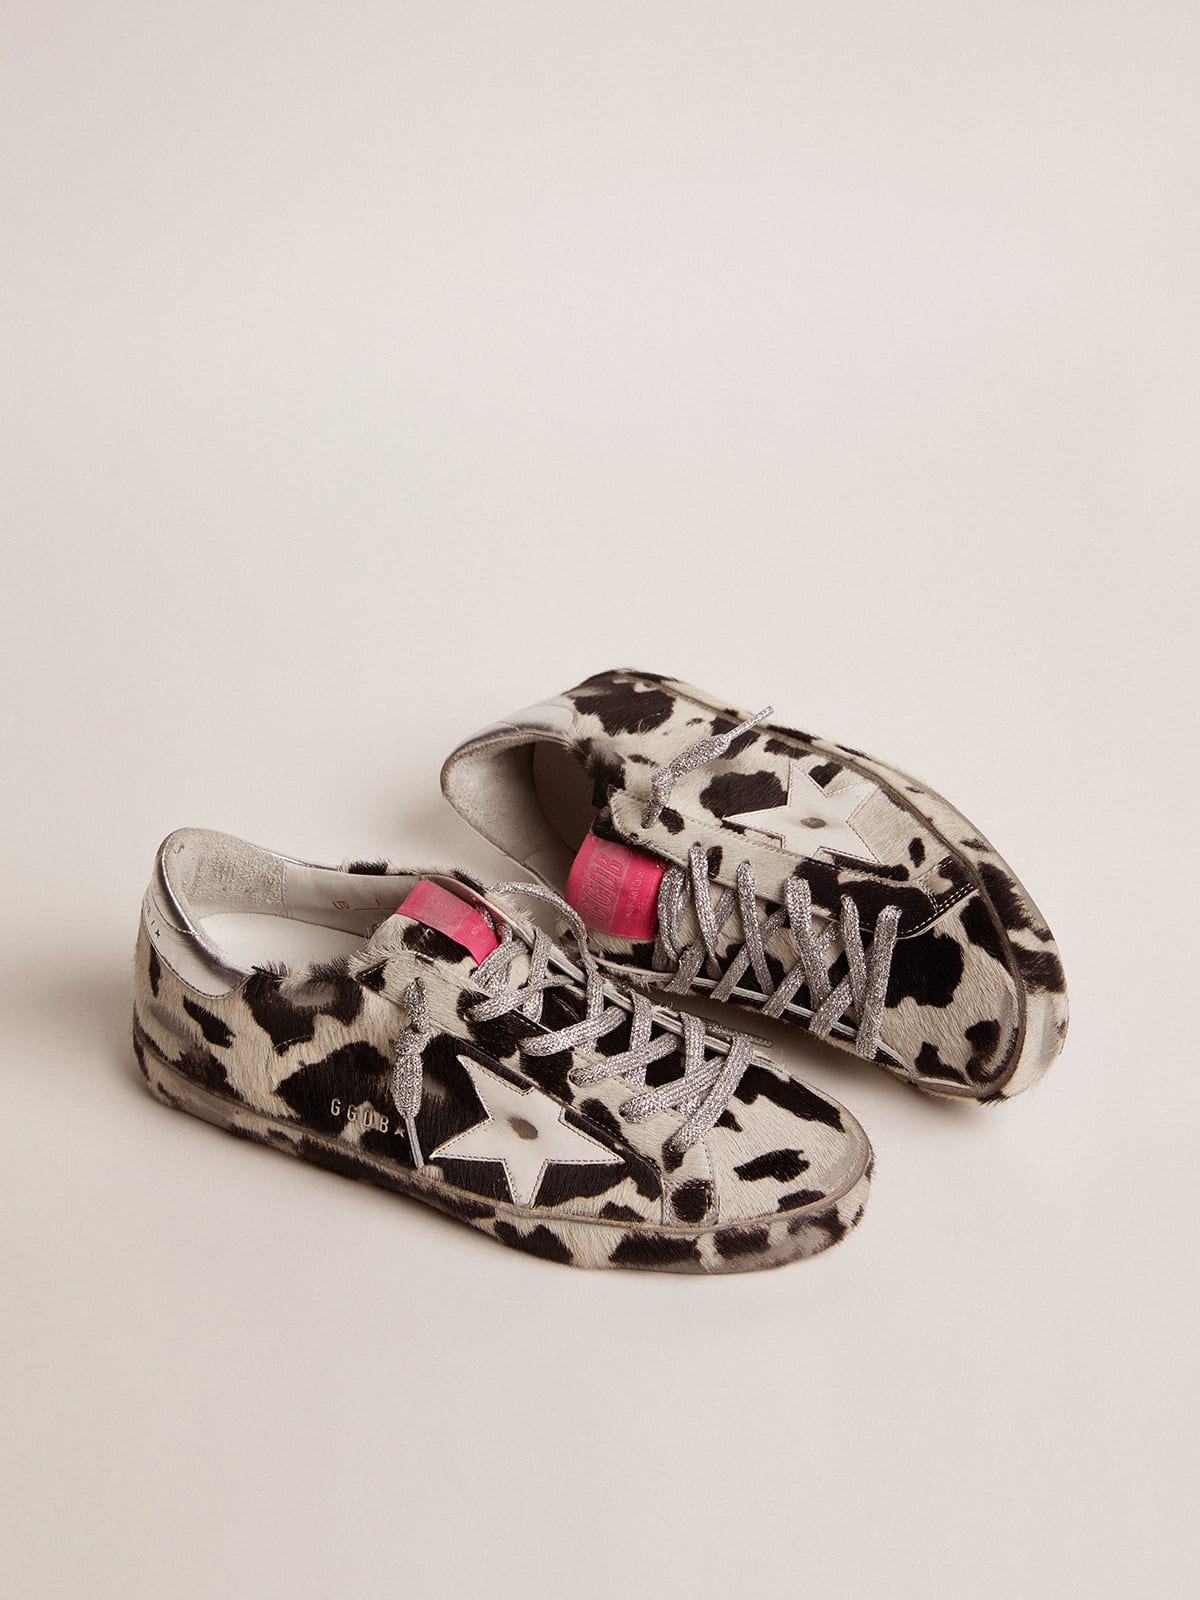 Golden Goose - Super-Star LAB sneakers in cow-print pony skin and white leather star in 